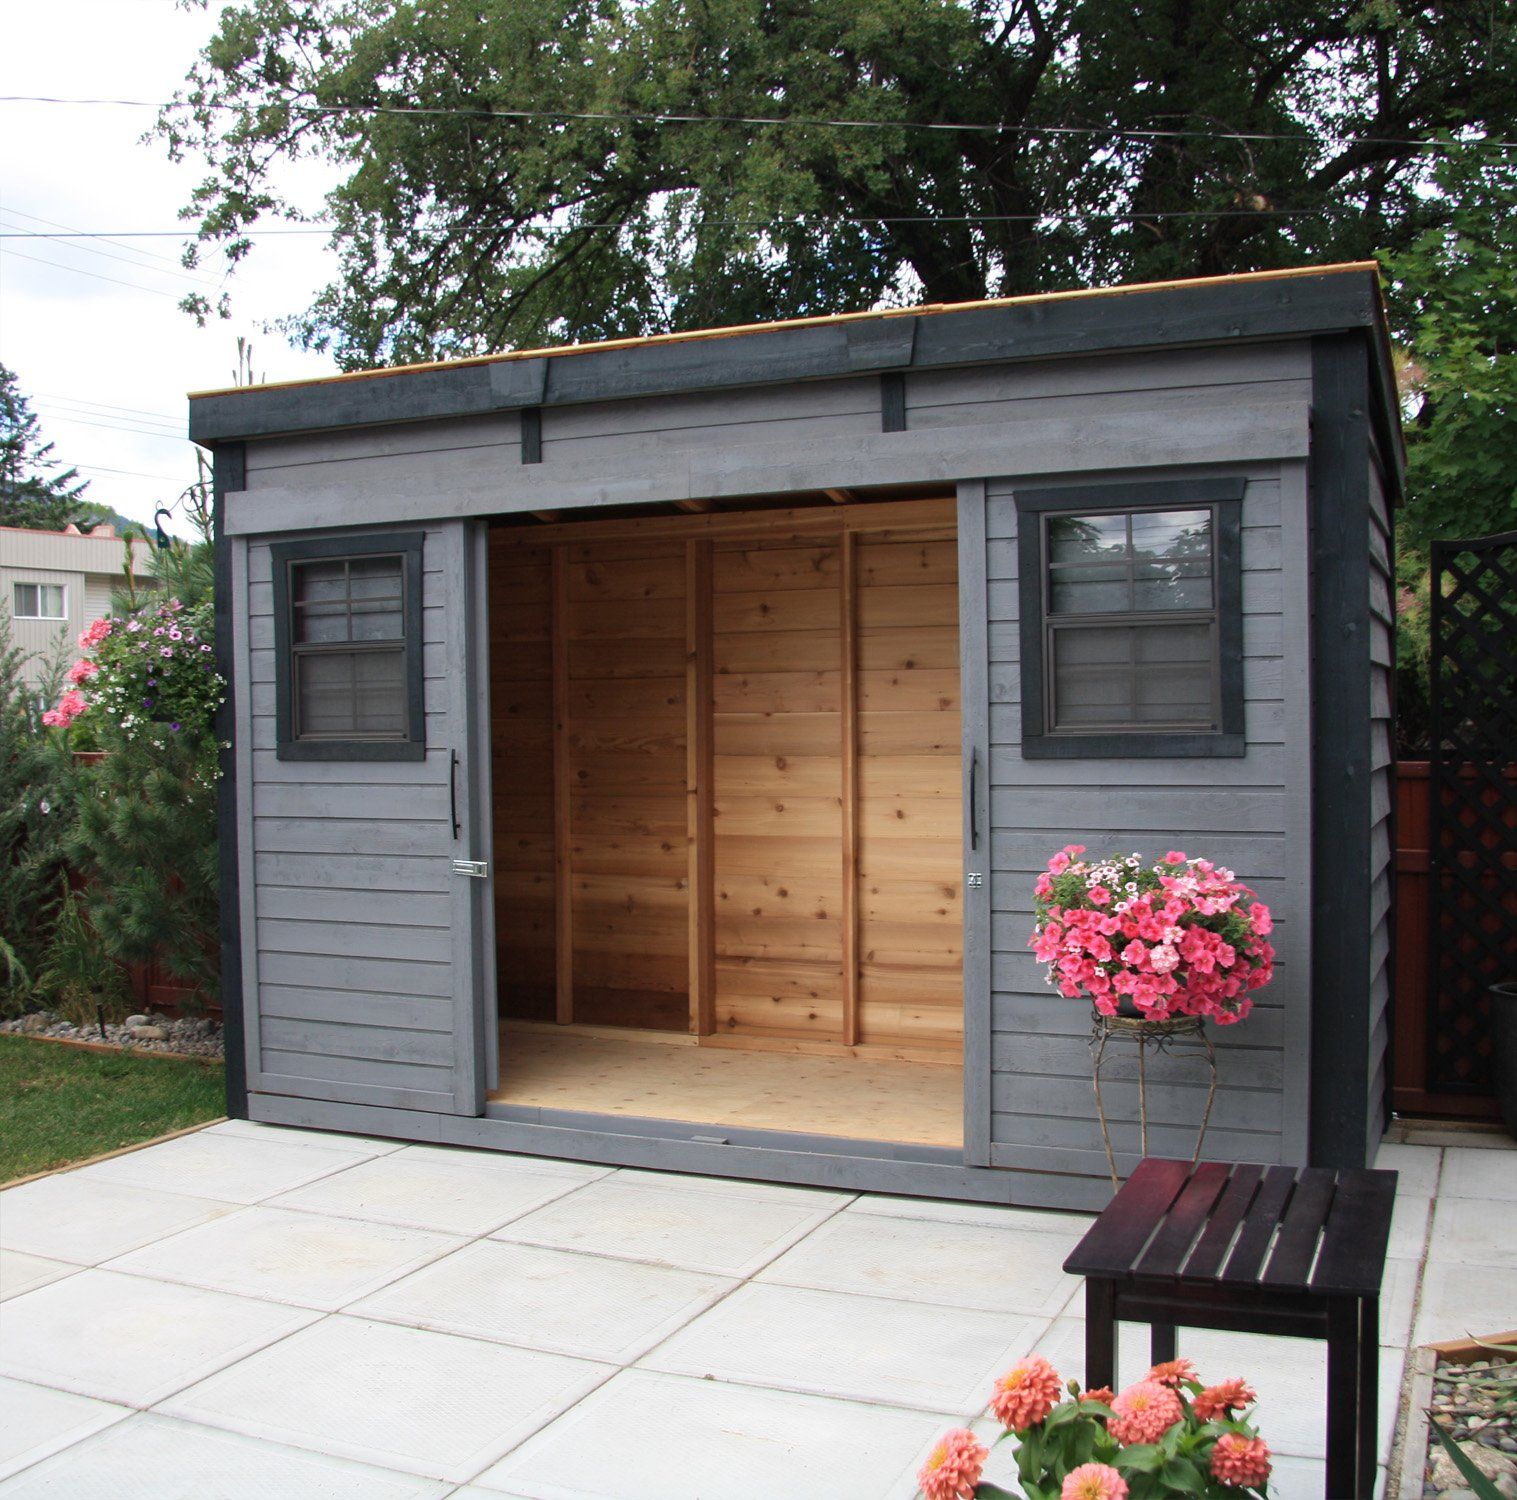 The Charm of Compact Garden Sheds